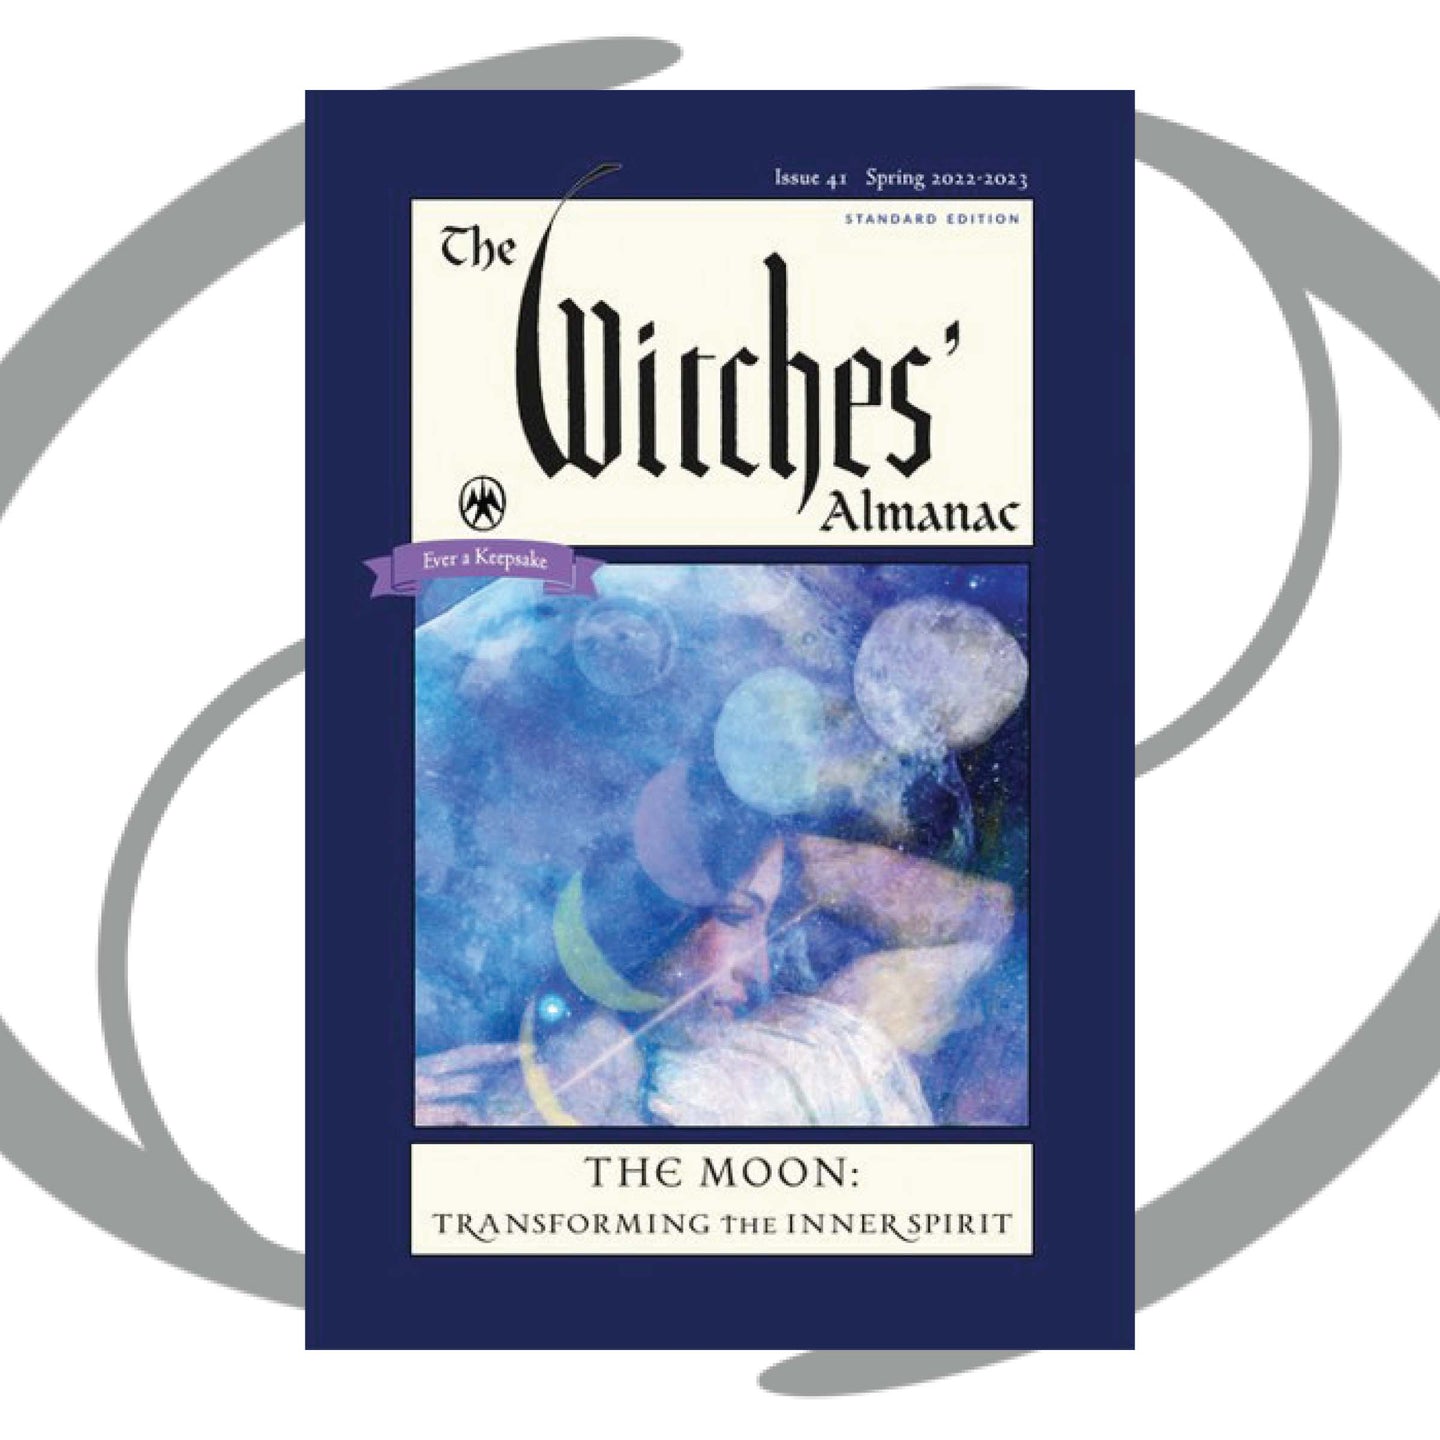 The Witches' Almanac, The Moon: Transforming the Inner Spirit